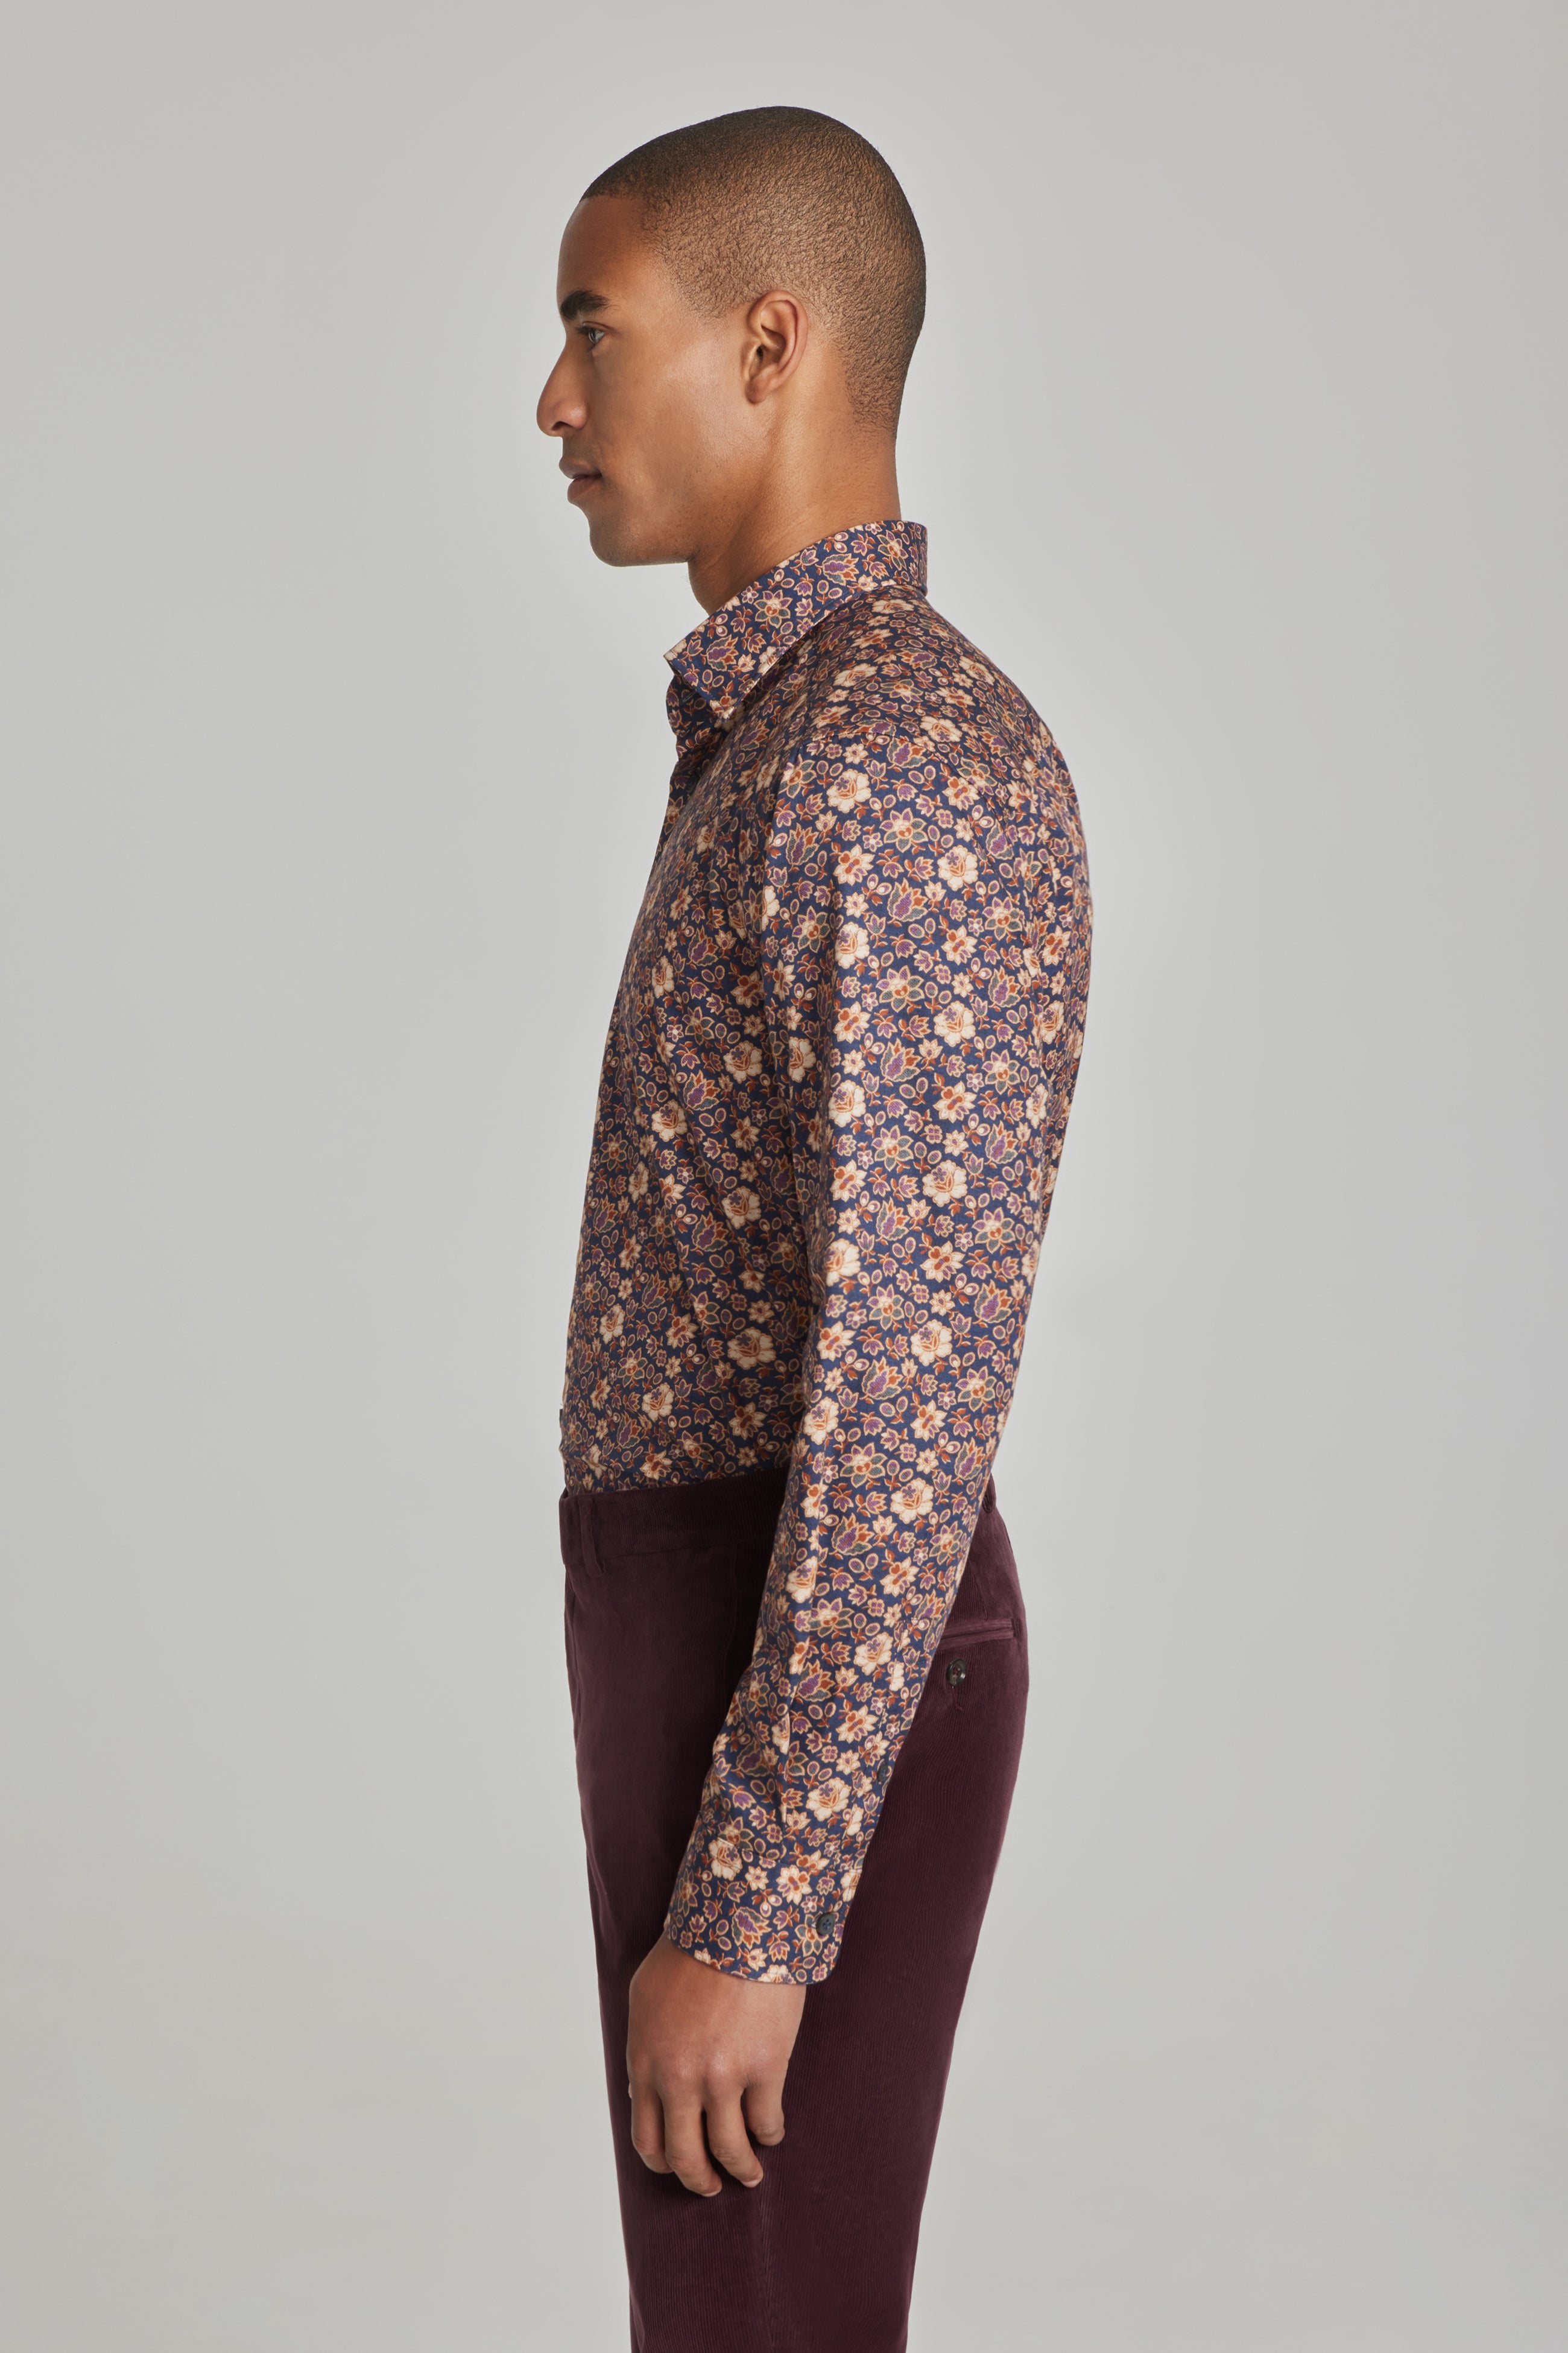 Alt view 3 Floral Print Cotton Shirt in Navy and Burgundy